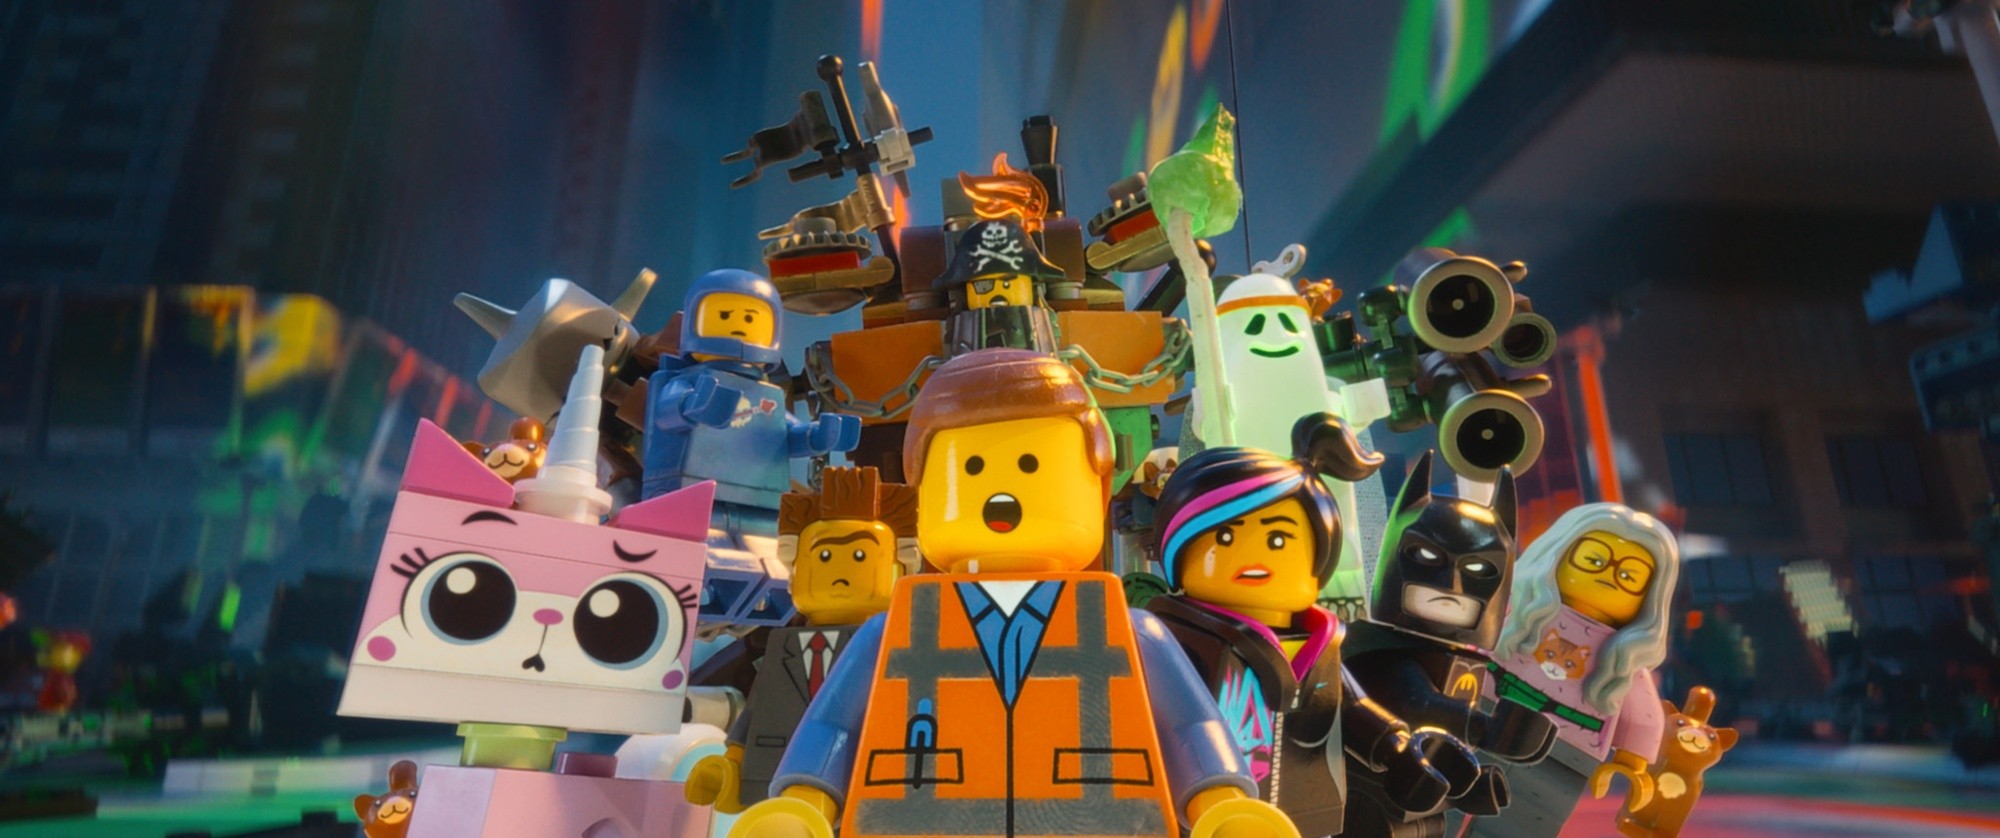 Uni-Kitty, Benny, Emmet, Lucy and Batman from Warner Bros. Pictures' The Lego Movie (2014)